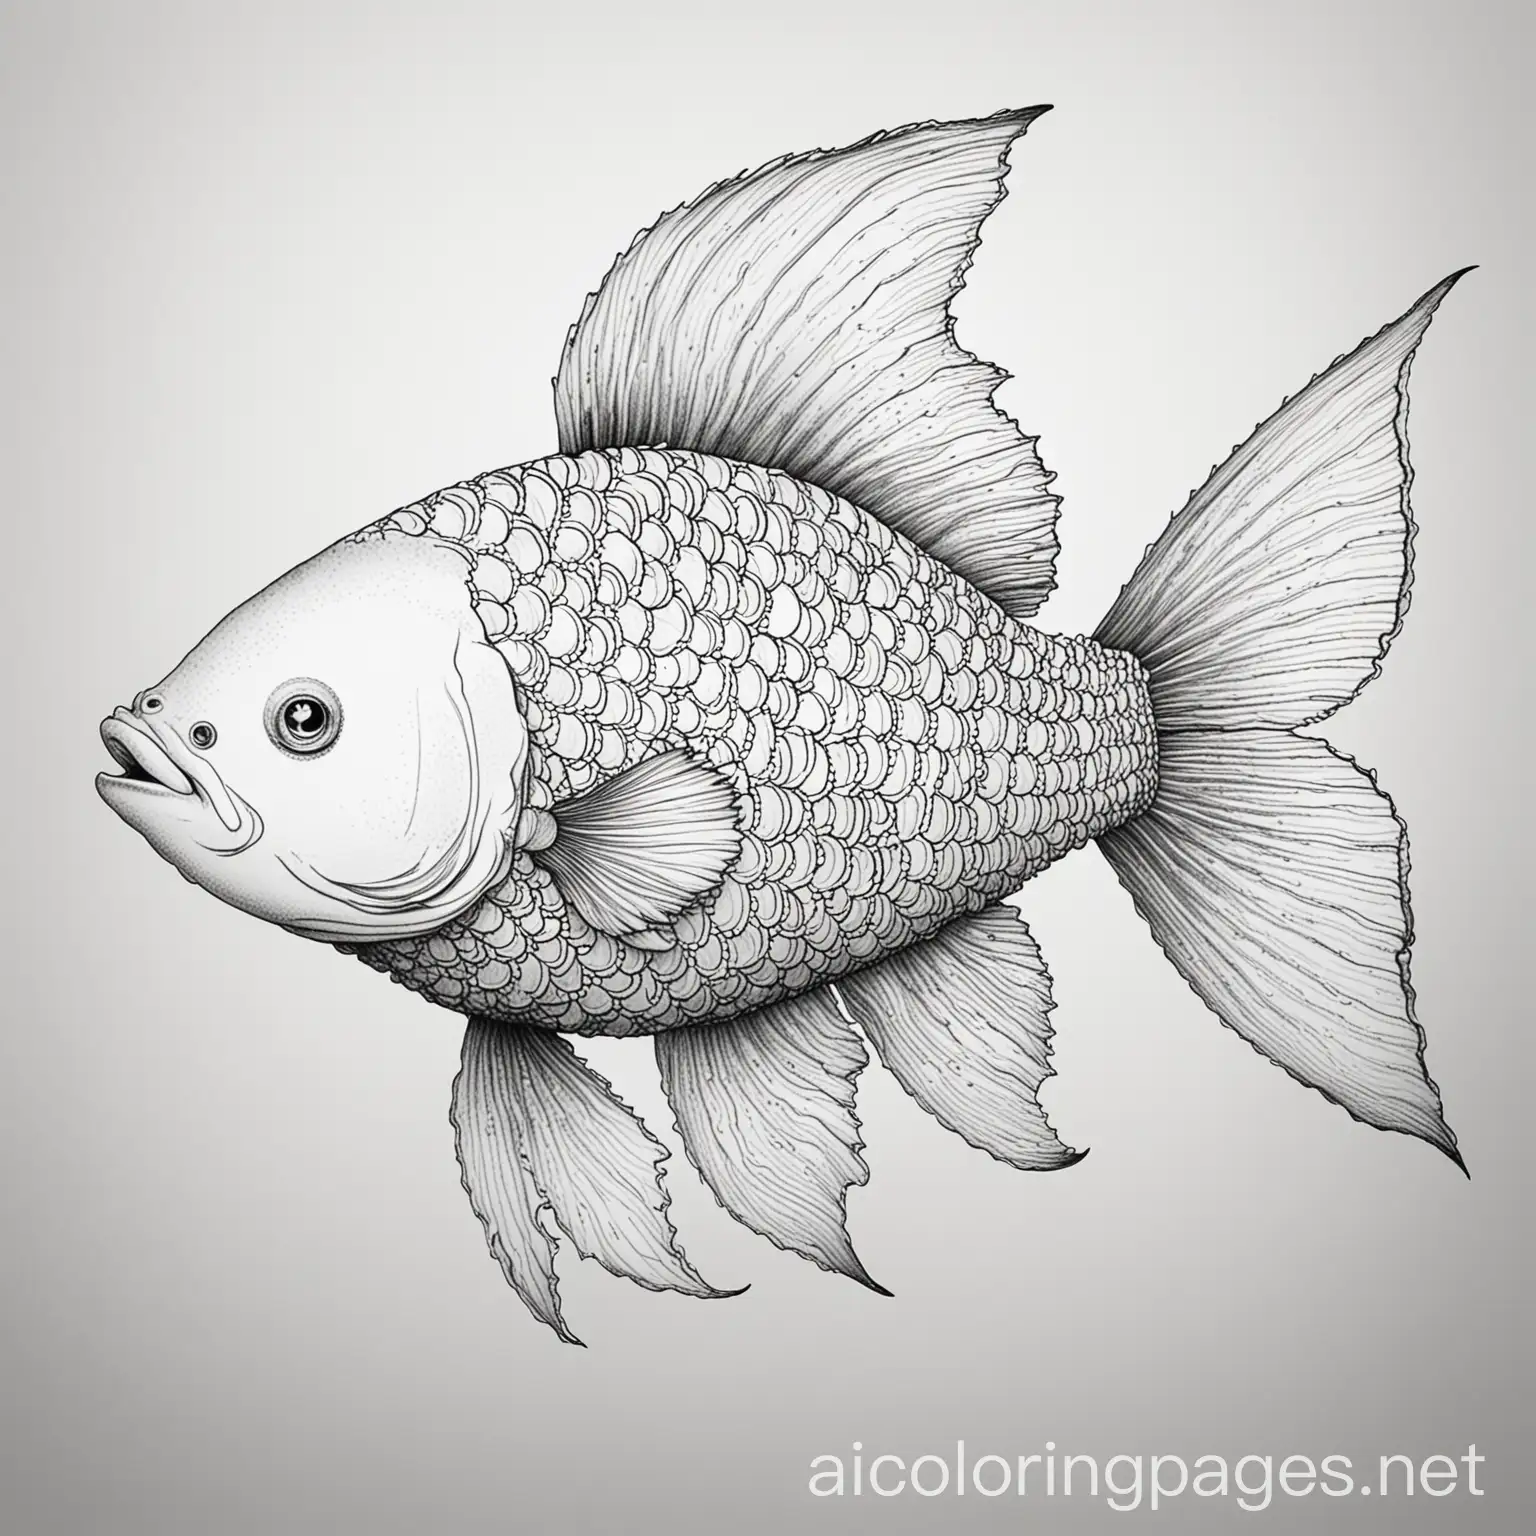 Big fish with scales and legs, Coloring Page, black and white, line art, white background, Simplicity, Ample White Space. The background of the coloring page is plain white to make it easy for young children to color within the lines. The outlines of all the subjects are easy to distinguish, making it simple for kids to color without too much difficulty